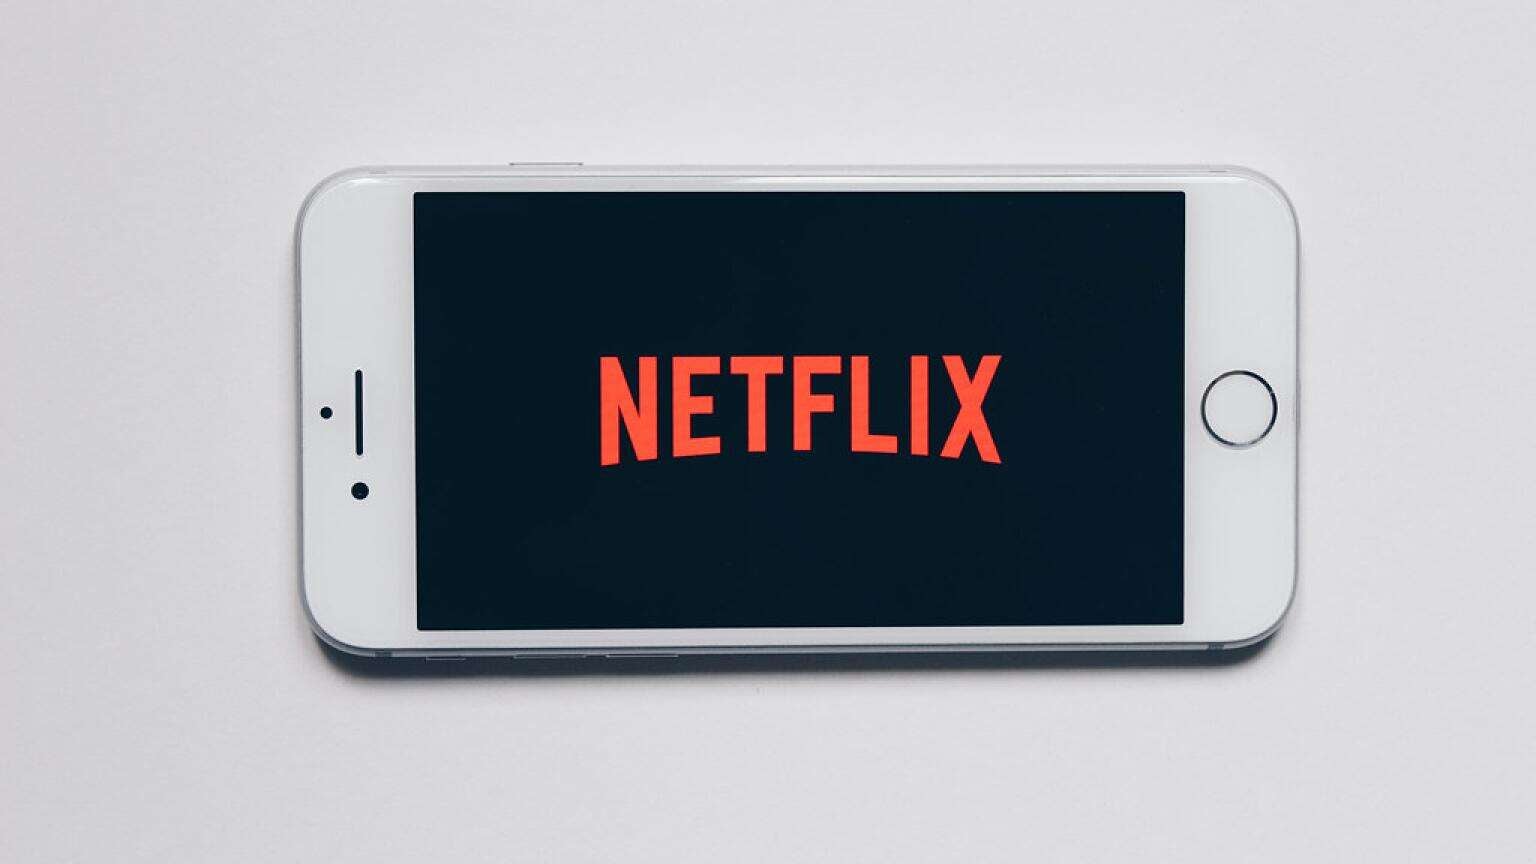 Netflix May Introduce Personalized Targeted Ads, But Not Right Away